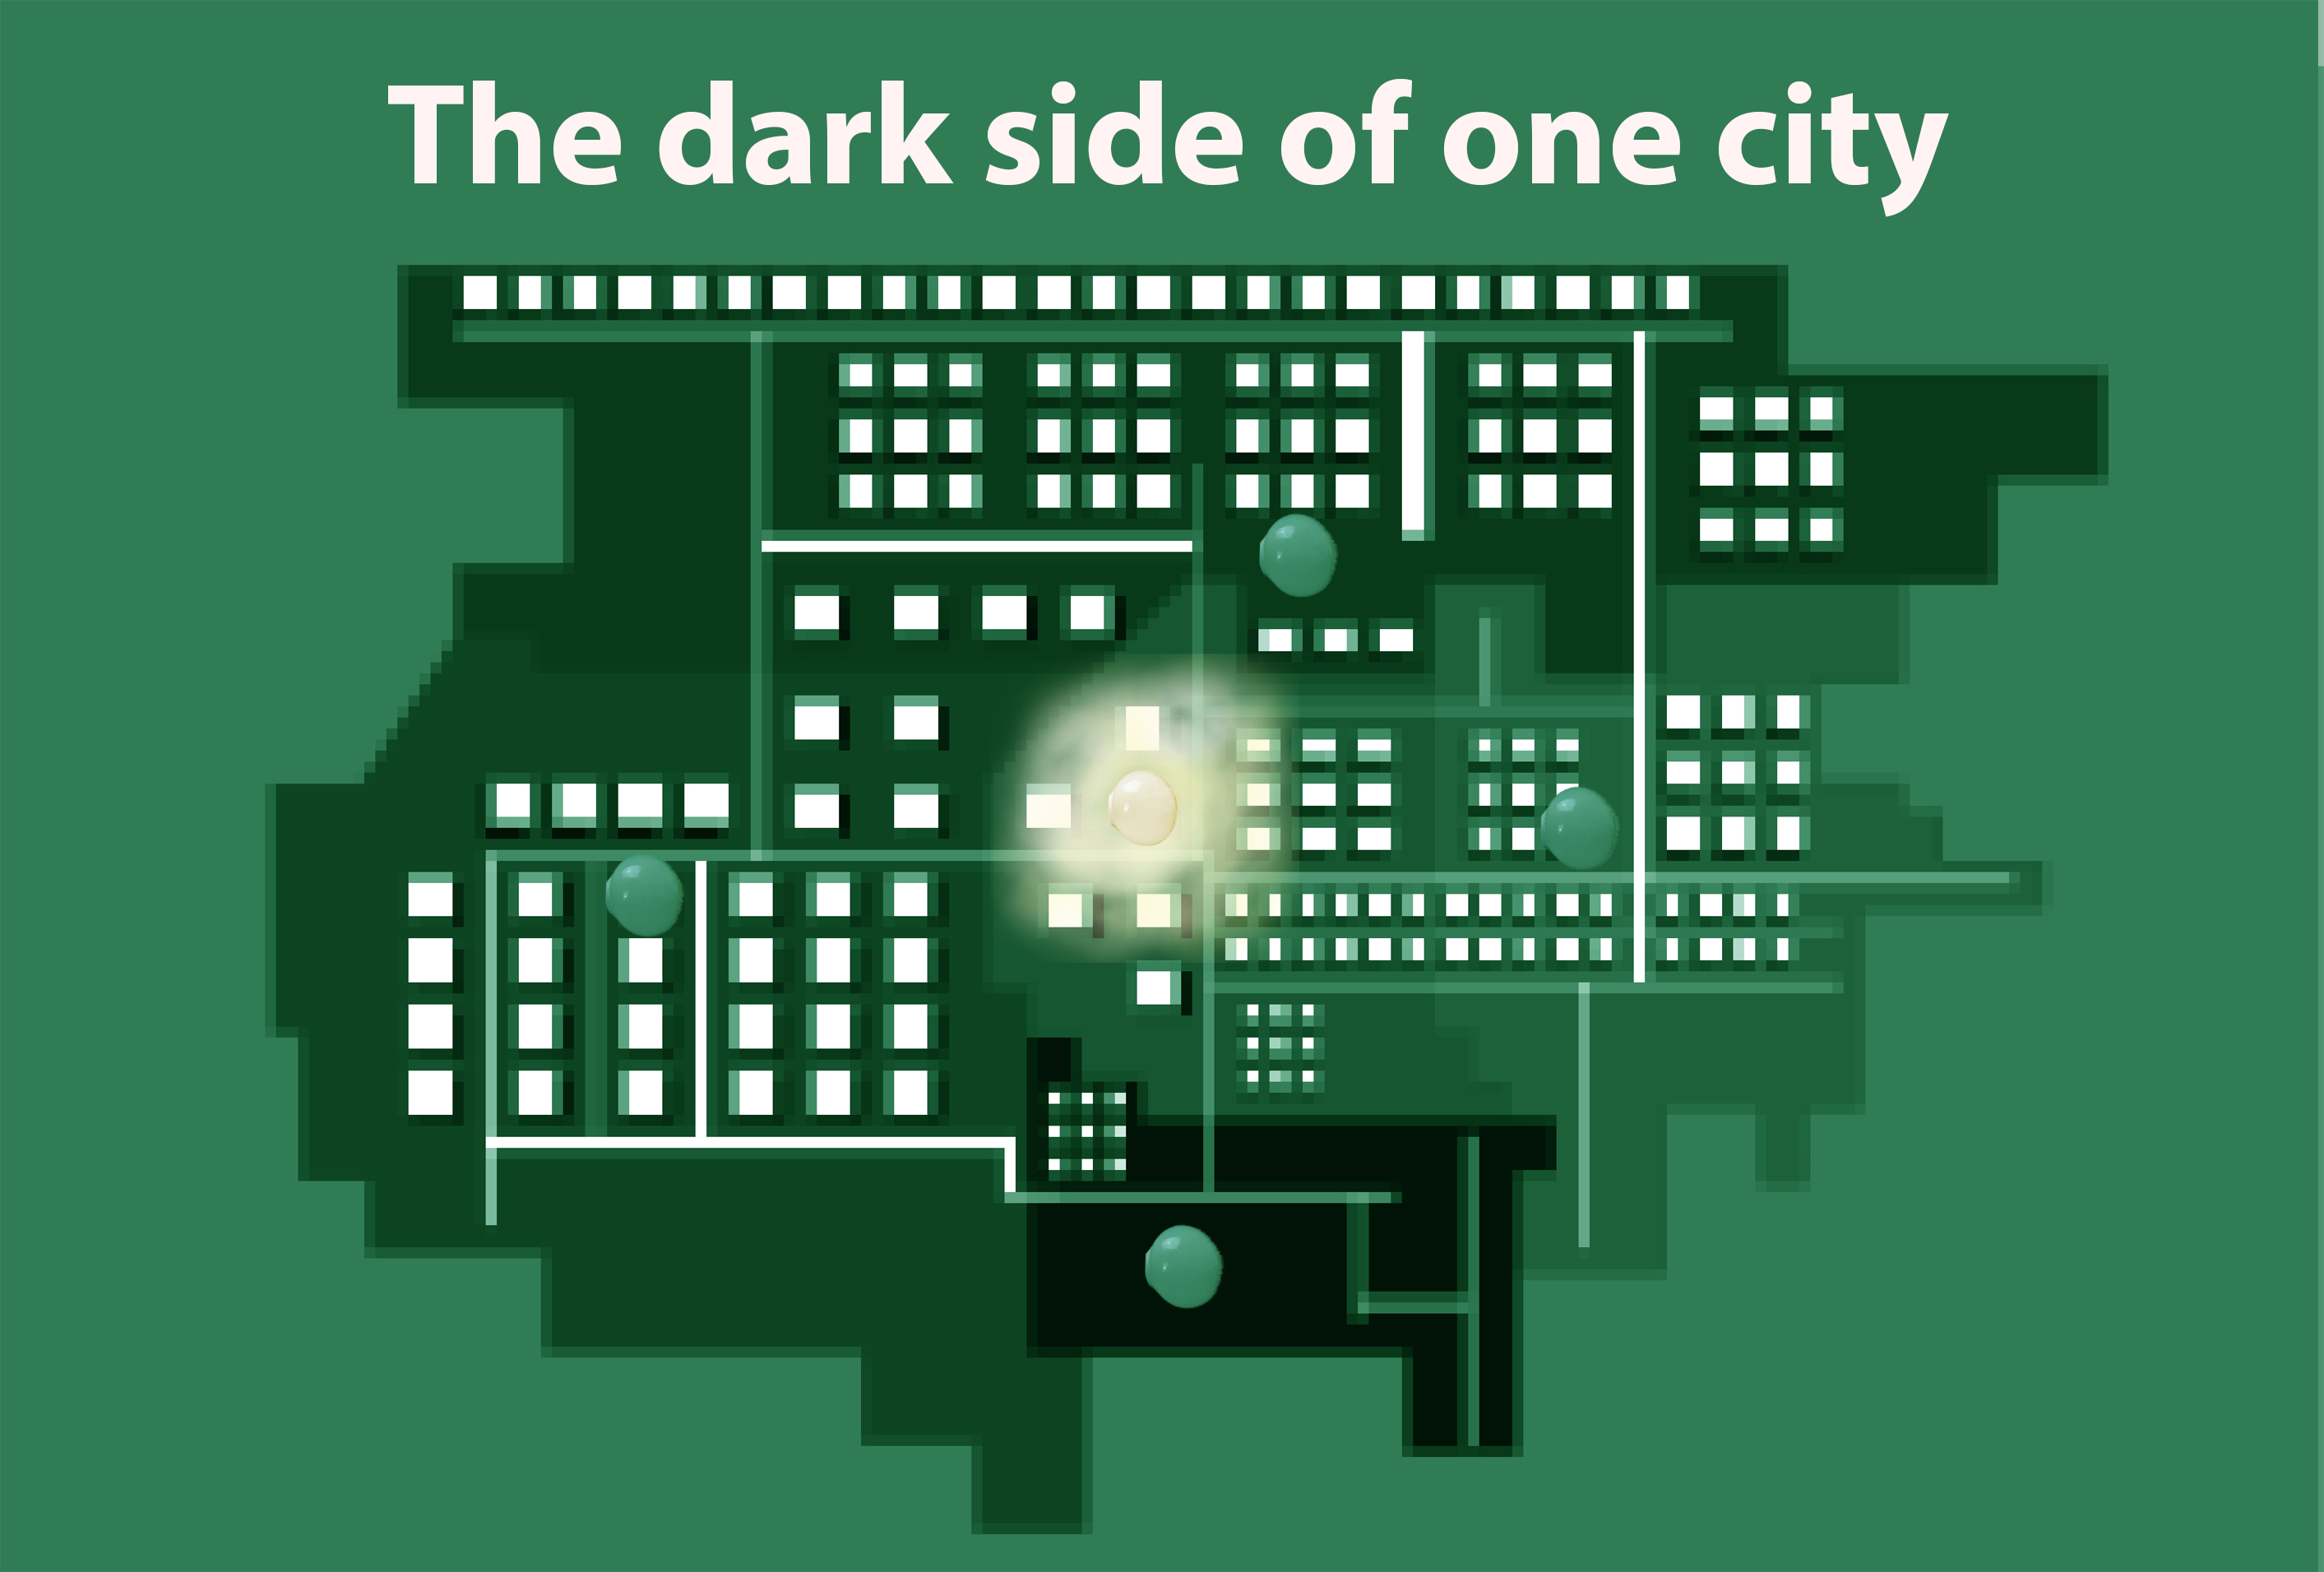 The dark side of one city